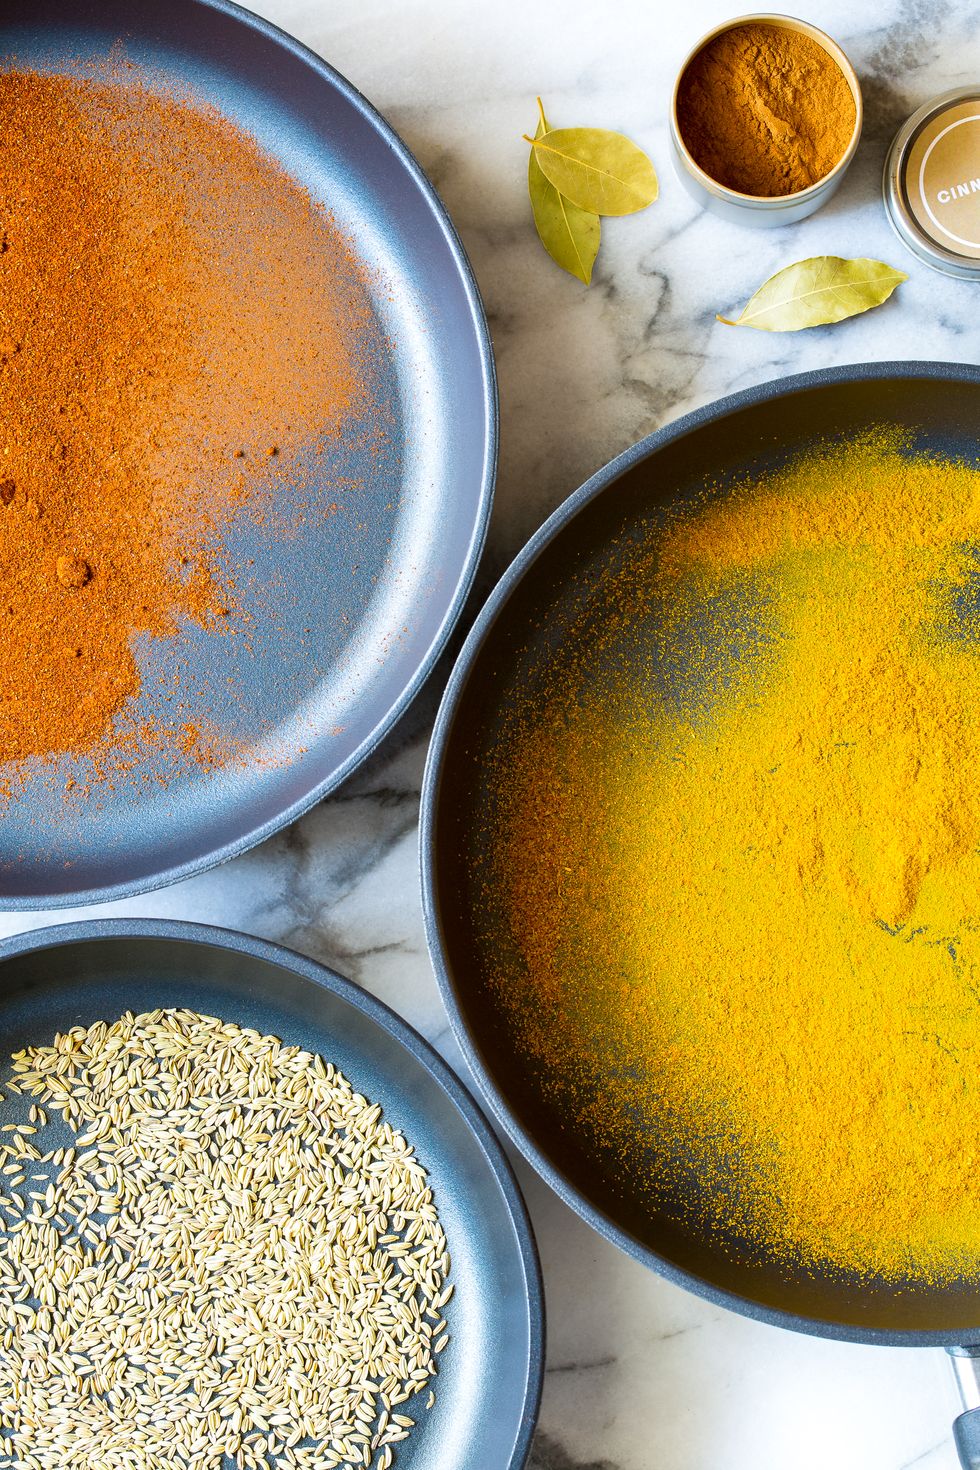 https://hips.hearstapps.com/thepioneerwoman/wp-content/uploads/2016/05/how-to-revive-spices-00b.jpg?resize=980:*